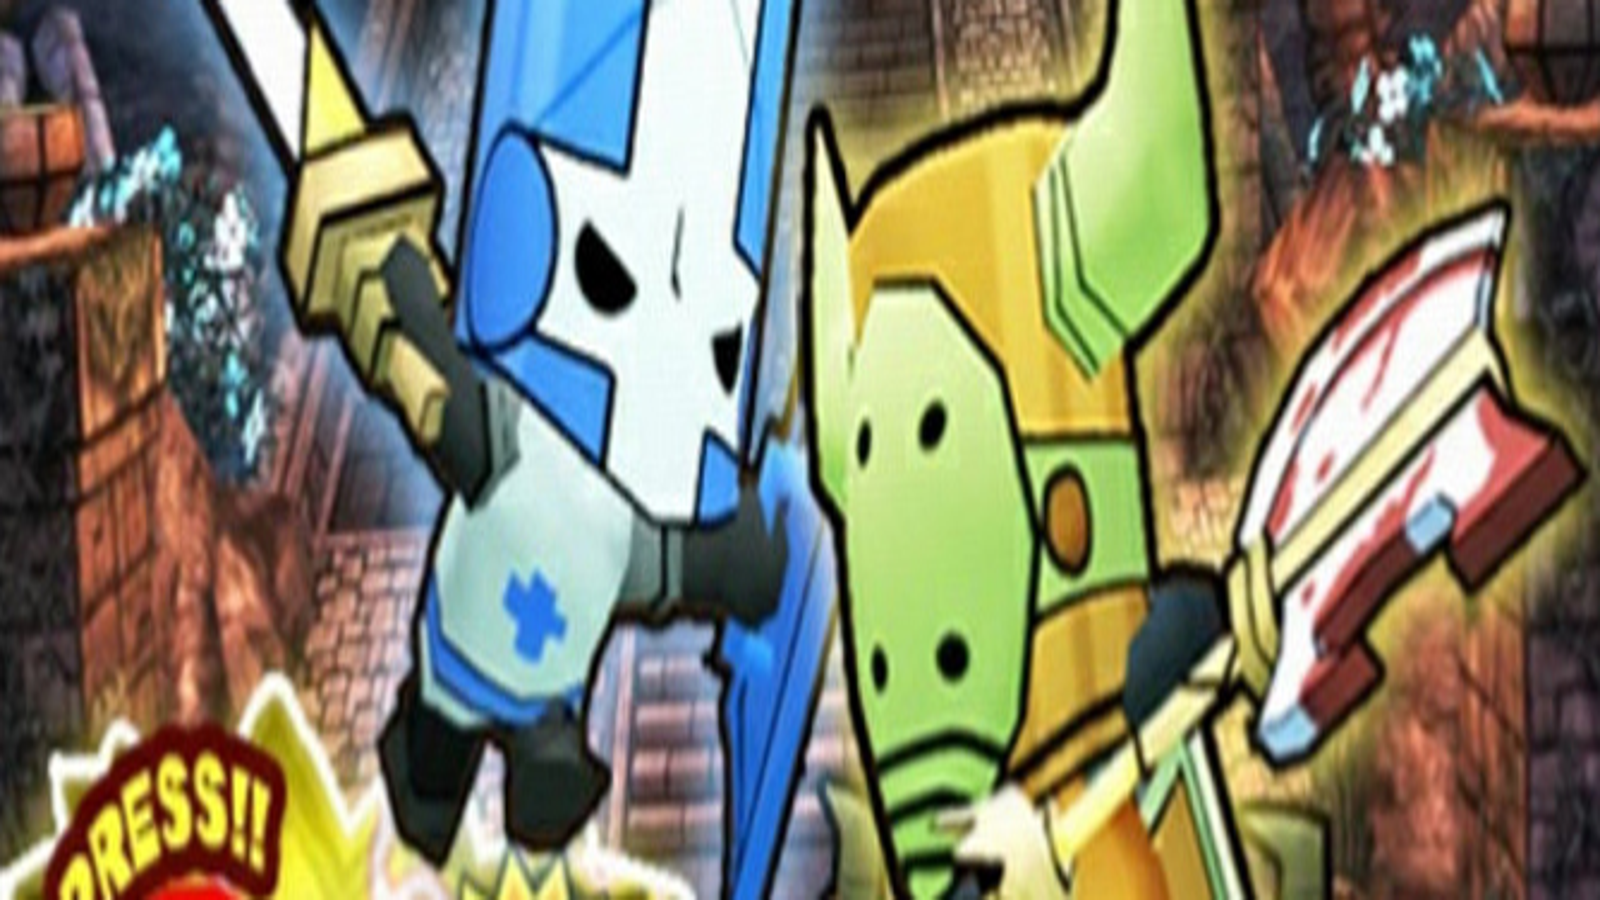 castle crashers knights - Google Search